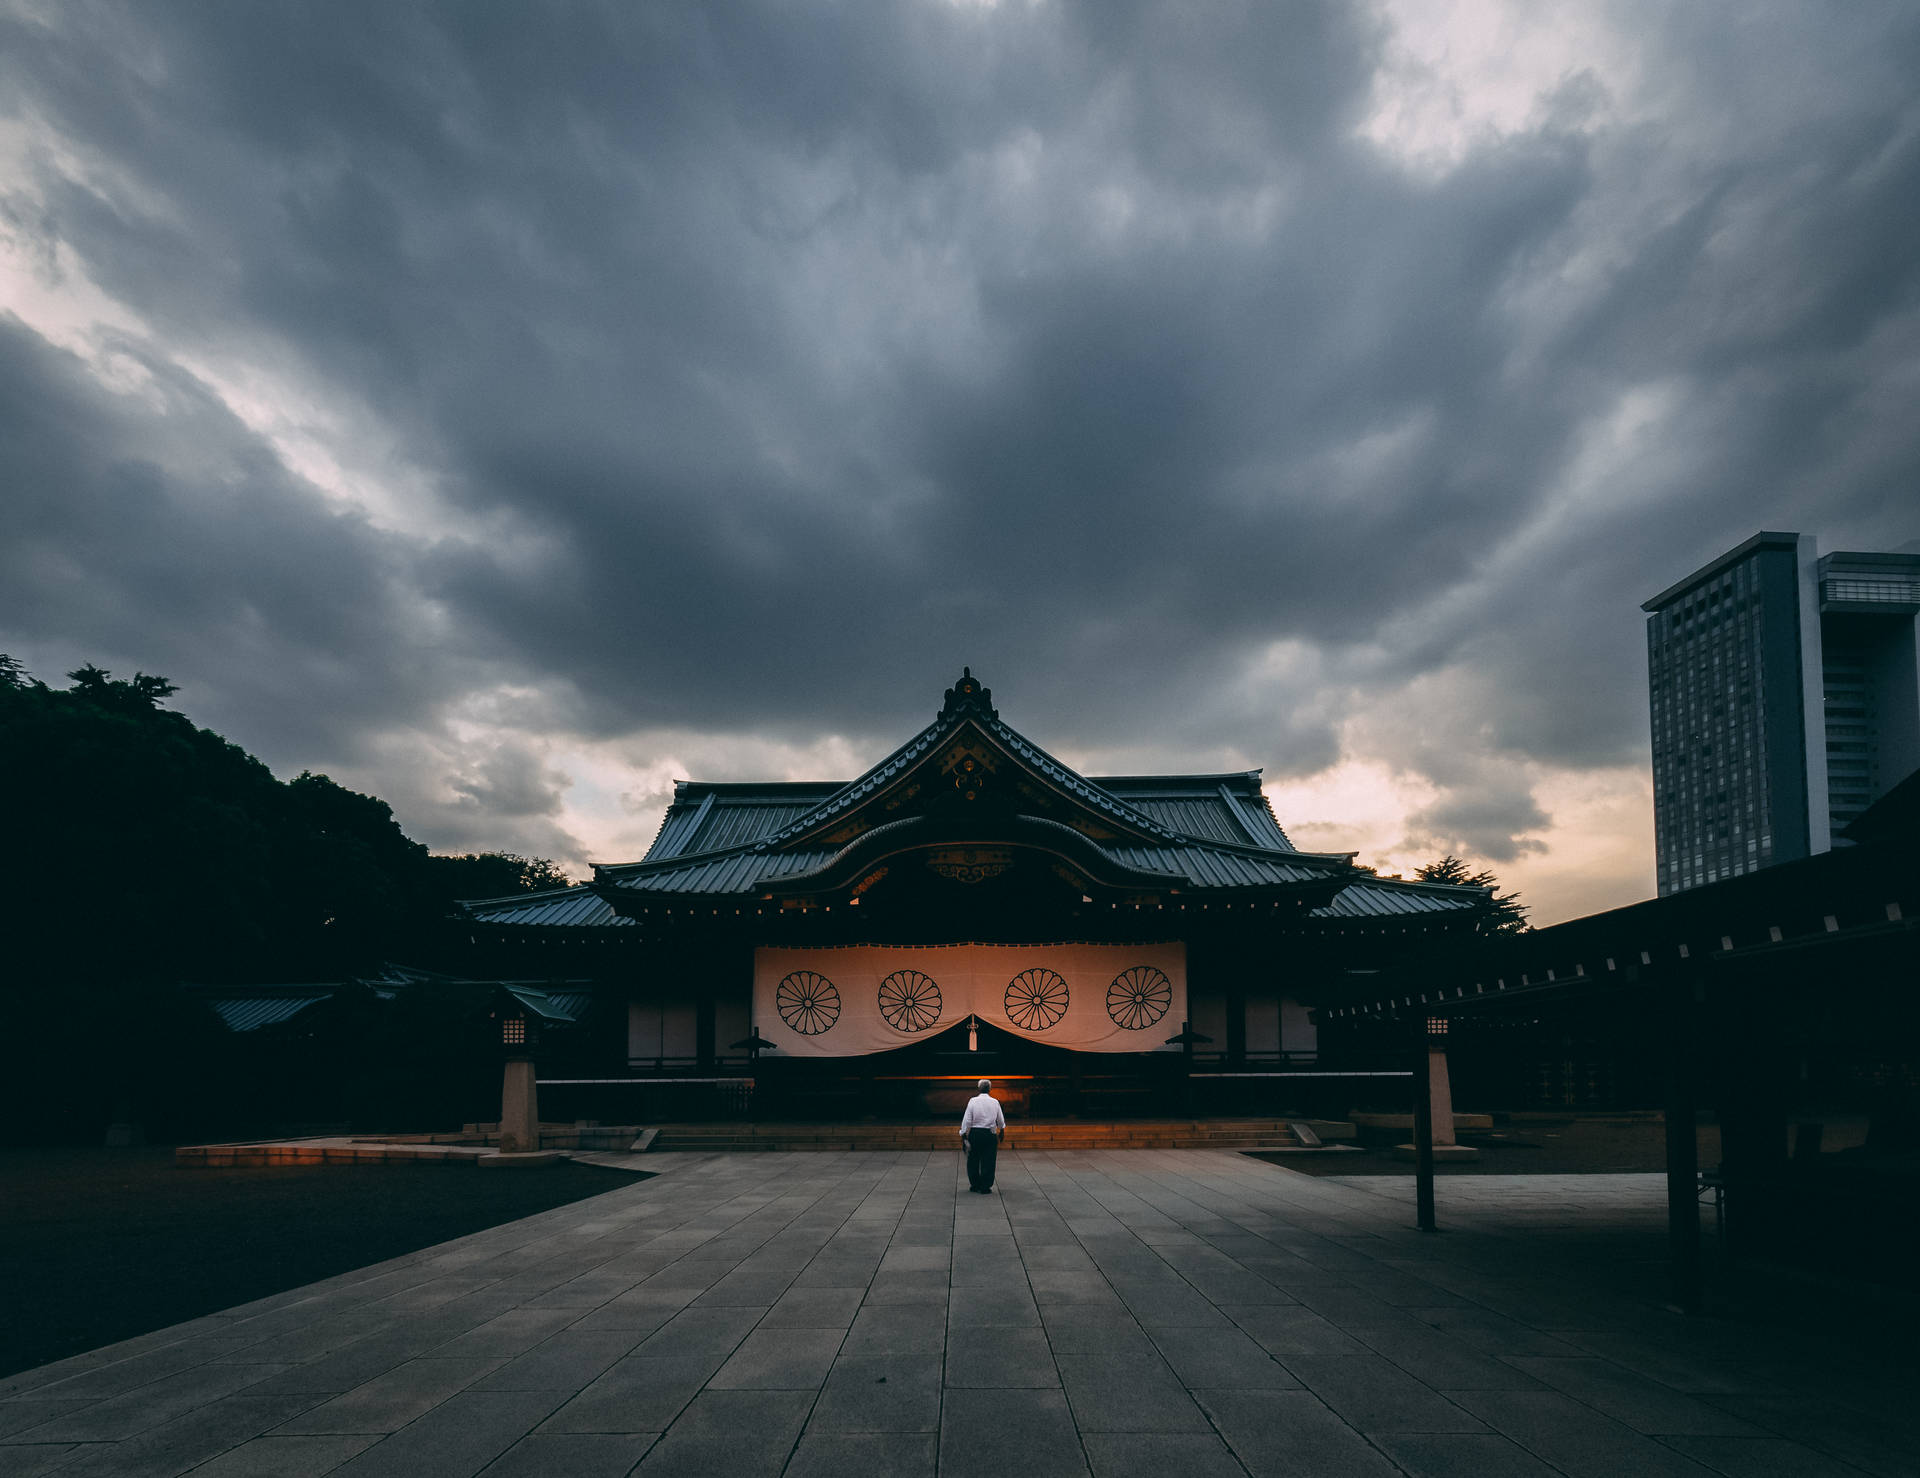 Illuminated By A Mysterious And Enthralling Glow, The Ancient City Of Japan Is Captivating.